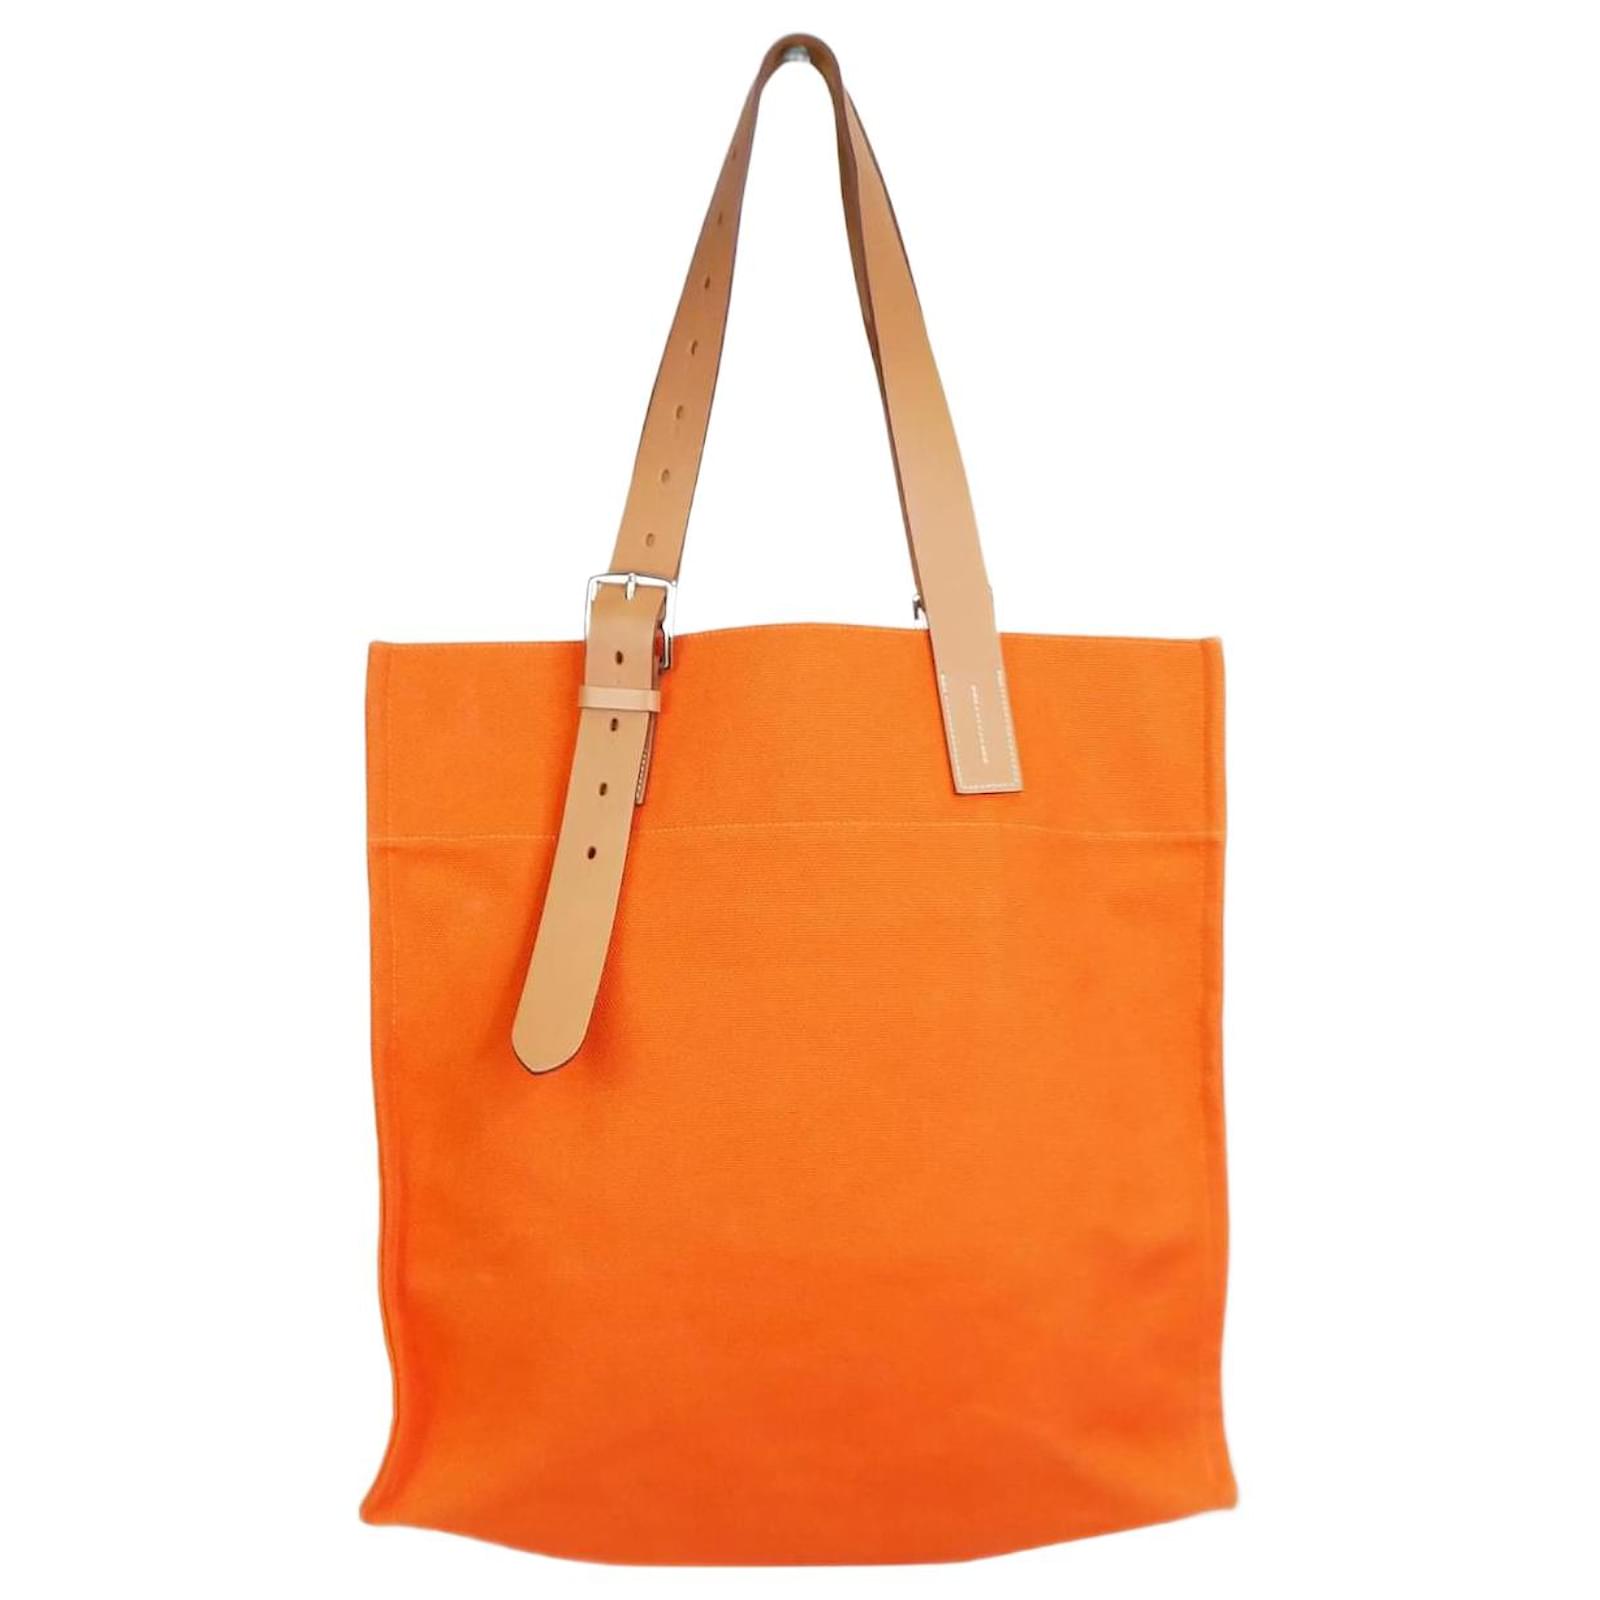 Hermes Canvas Tote 